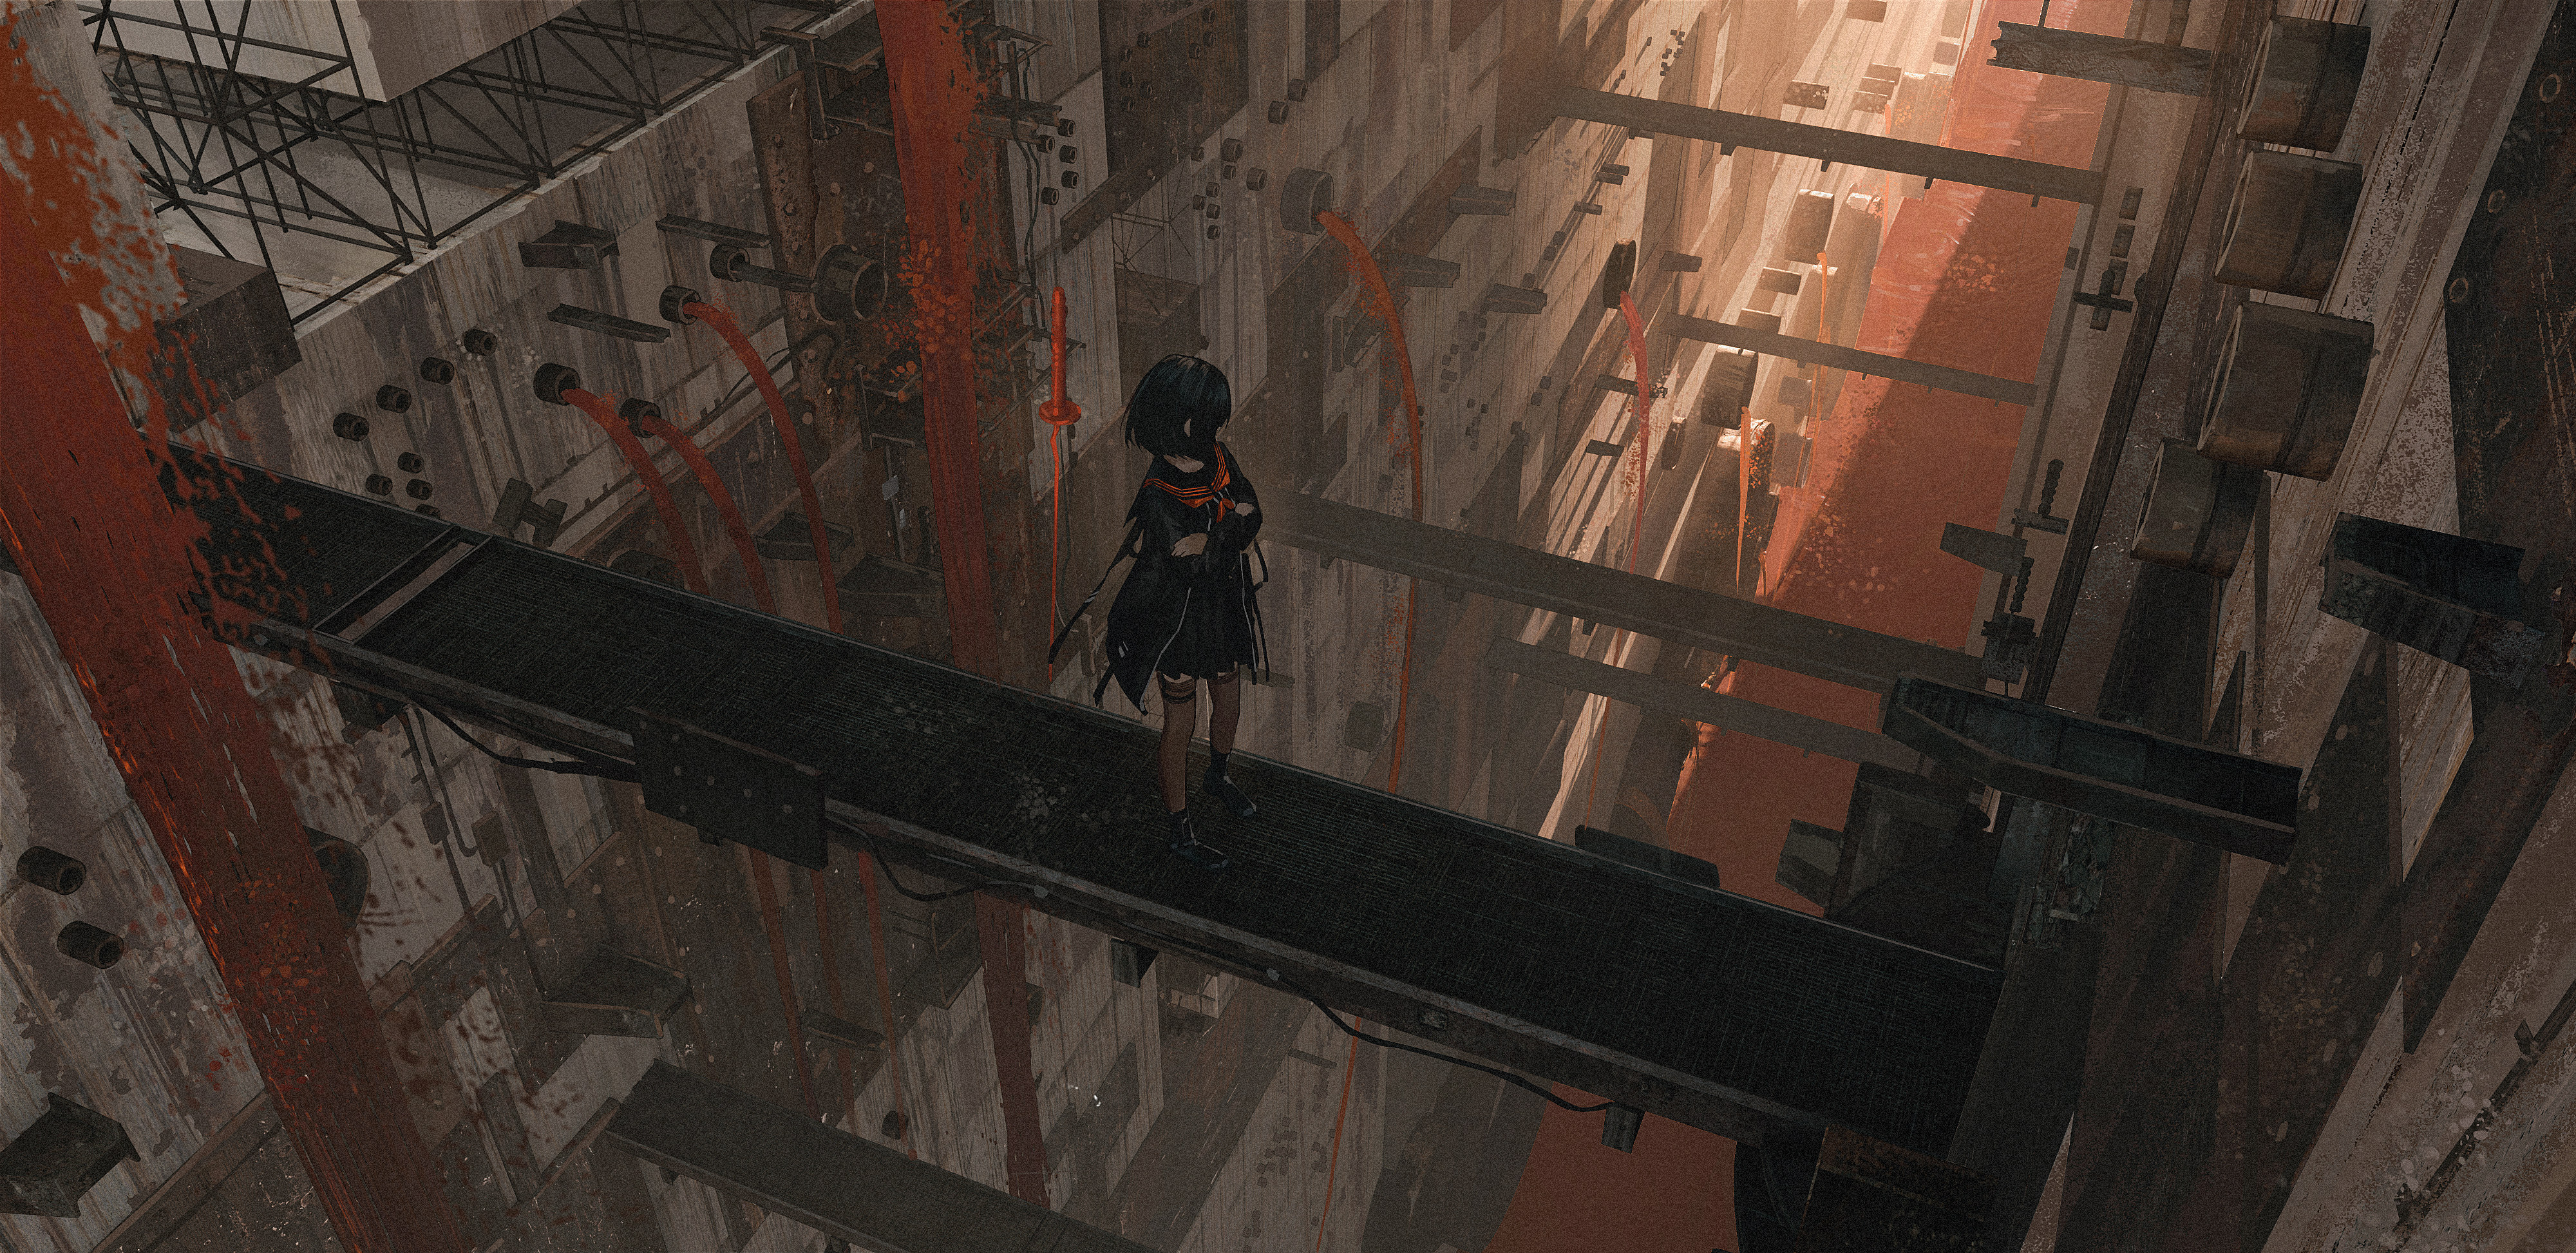 Anime 4000x1945 anime anime girls sword short hair black hair pipes city tight pants looking away schoolgirl school uniform arms crossed standing floating neckerchief looking into the distance skirt women with swords Homutan